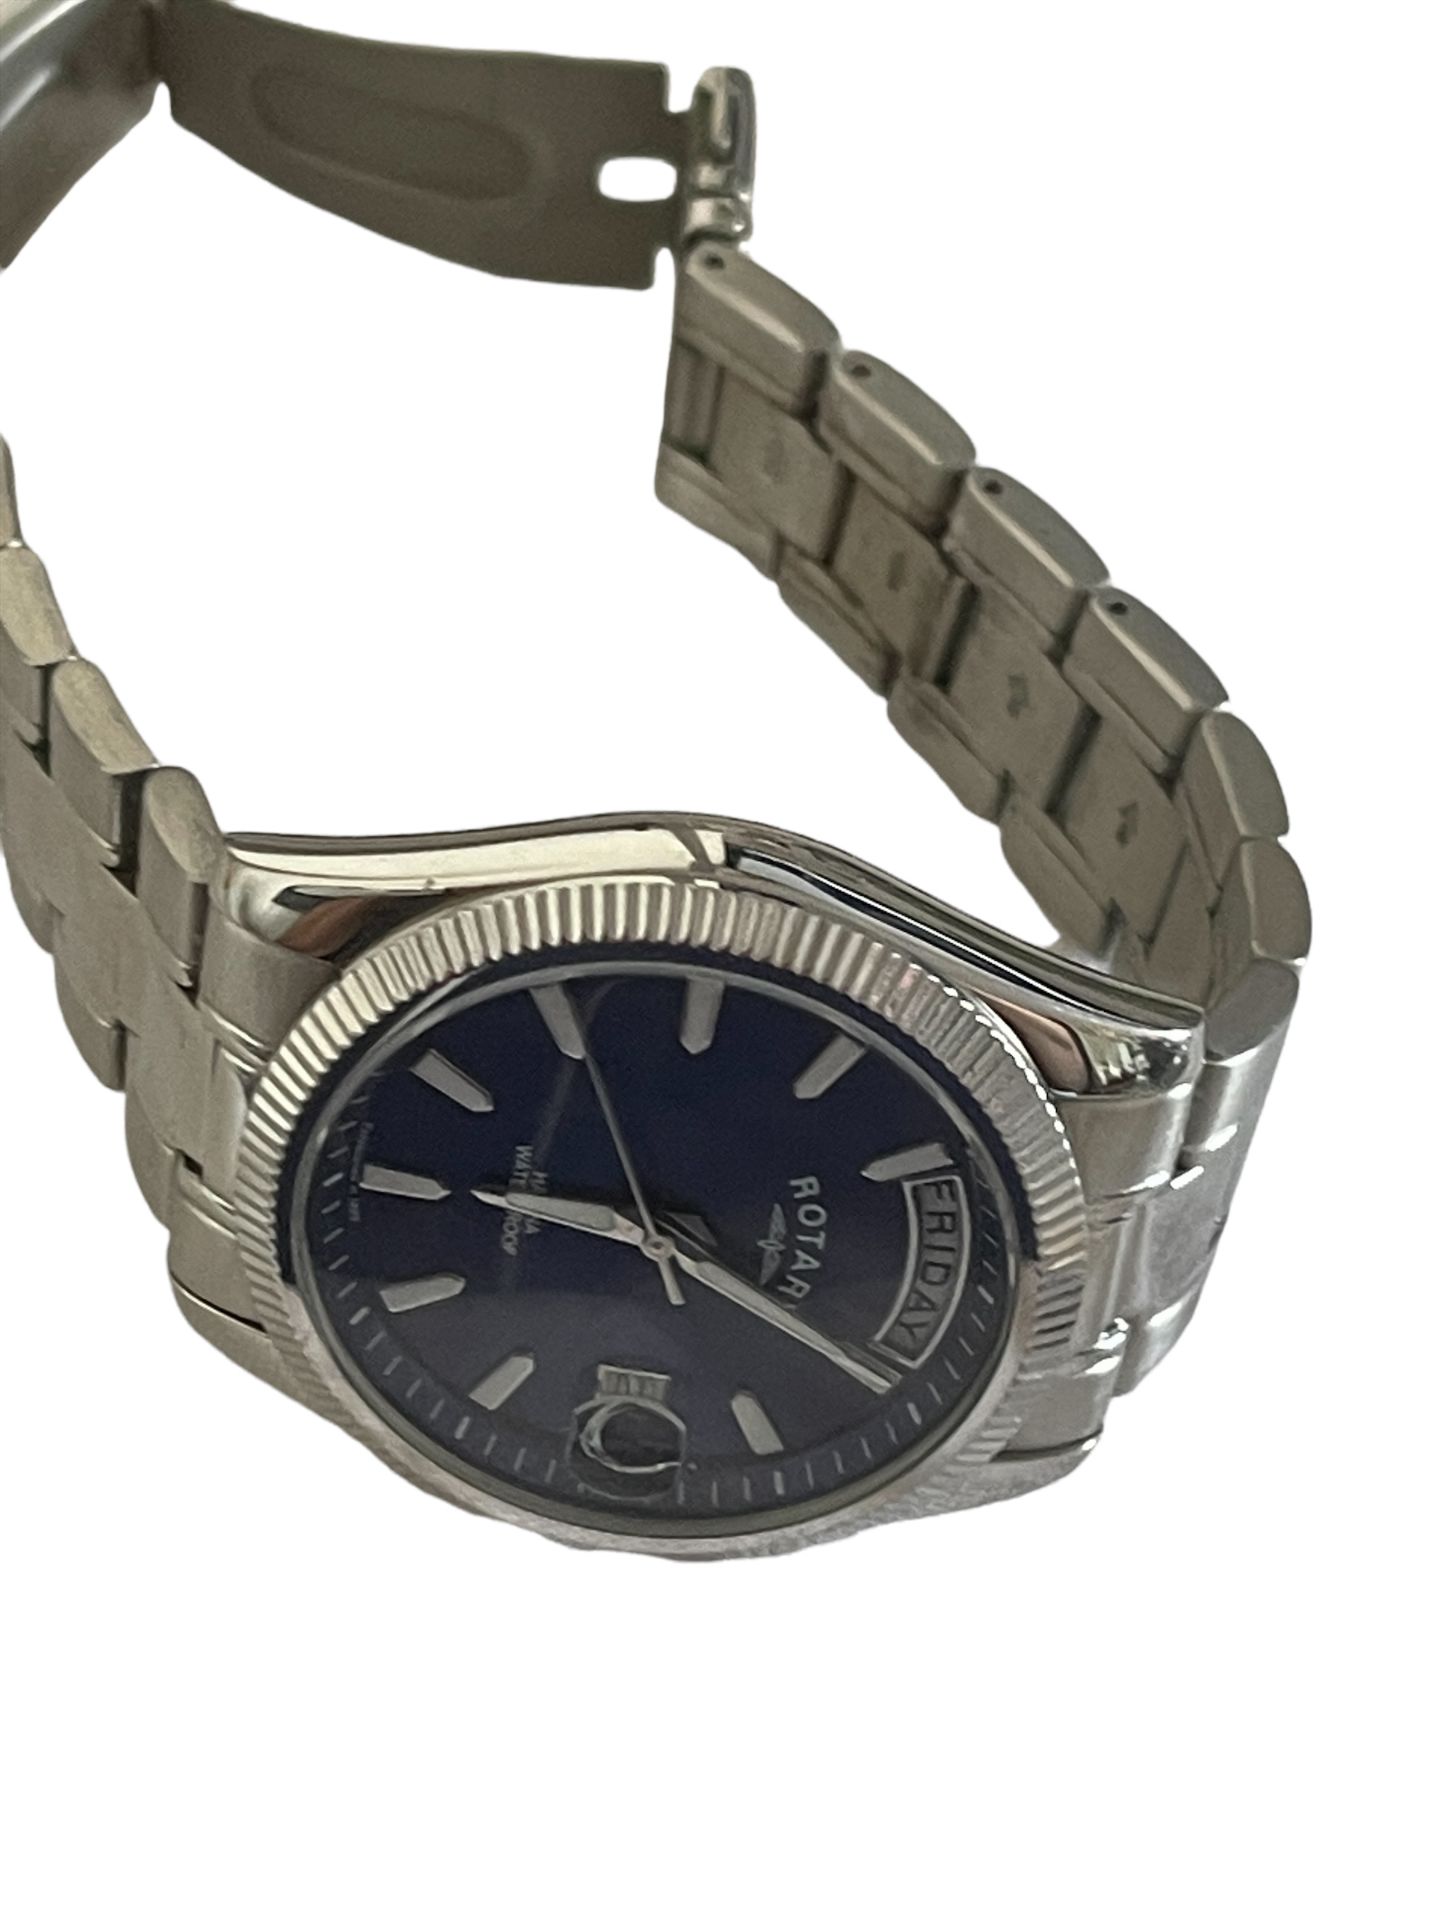 Men's Rotary Havana Watch RRP £199 - Working order - Ex Demo or Return Stock from Private Jet Char.. - Image 5 of 5